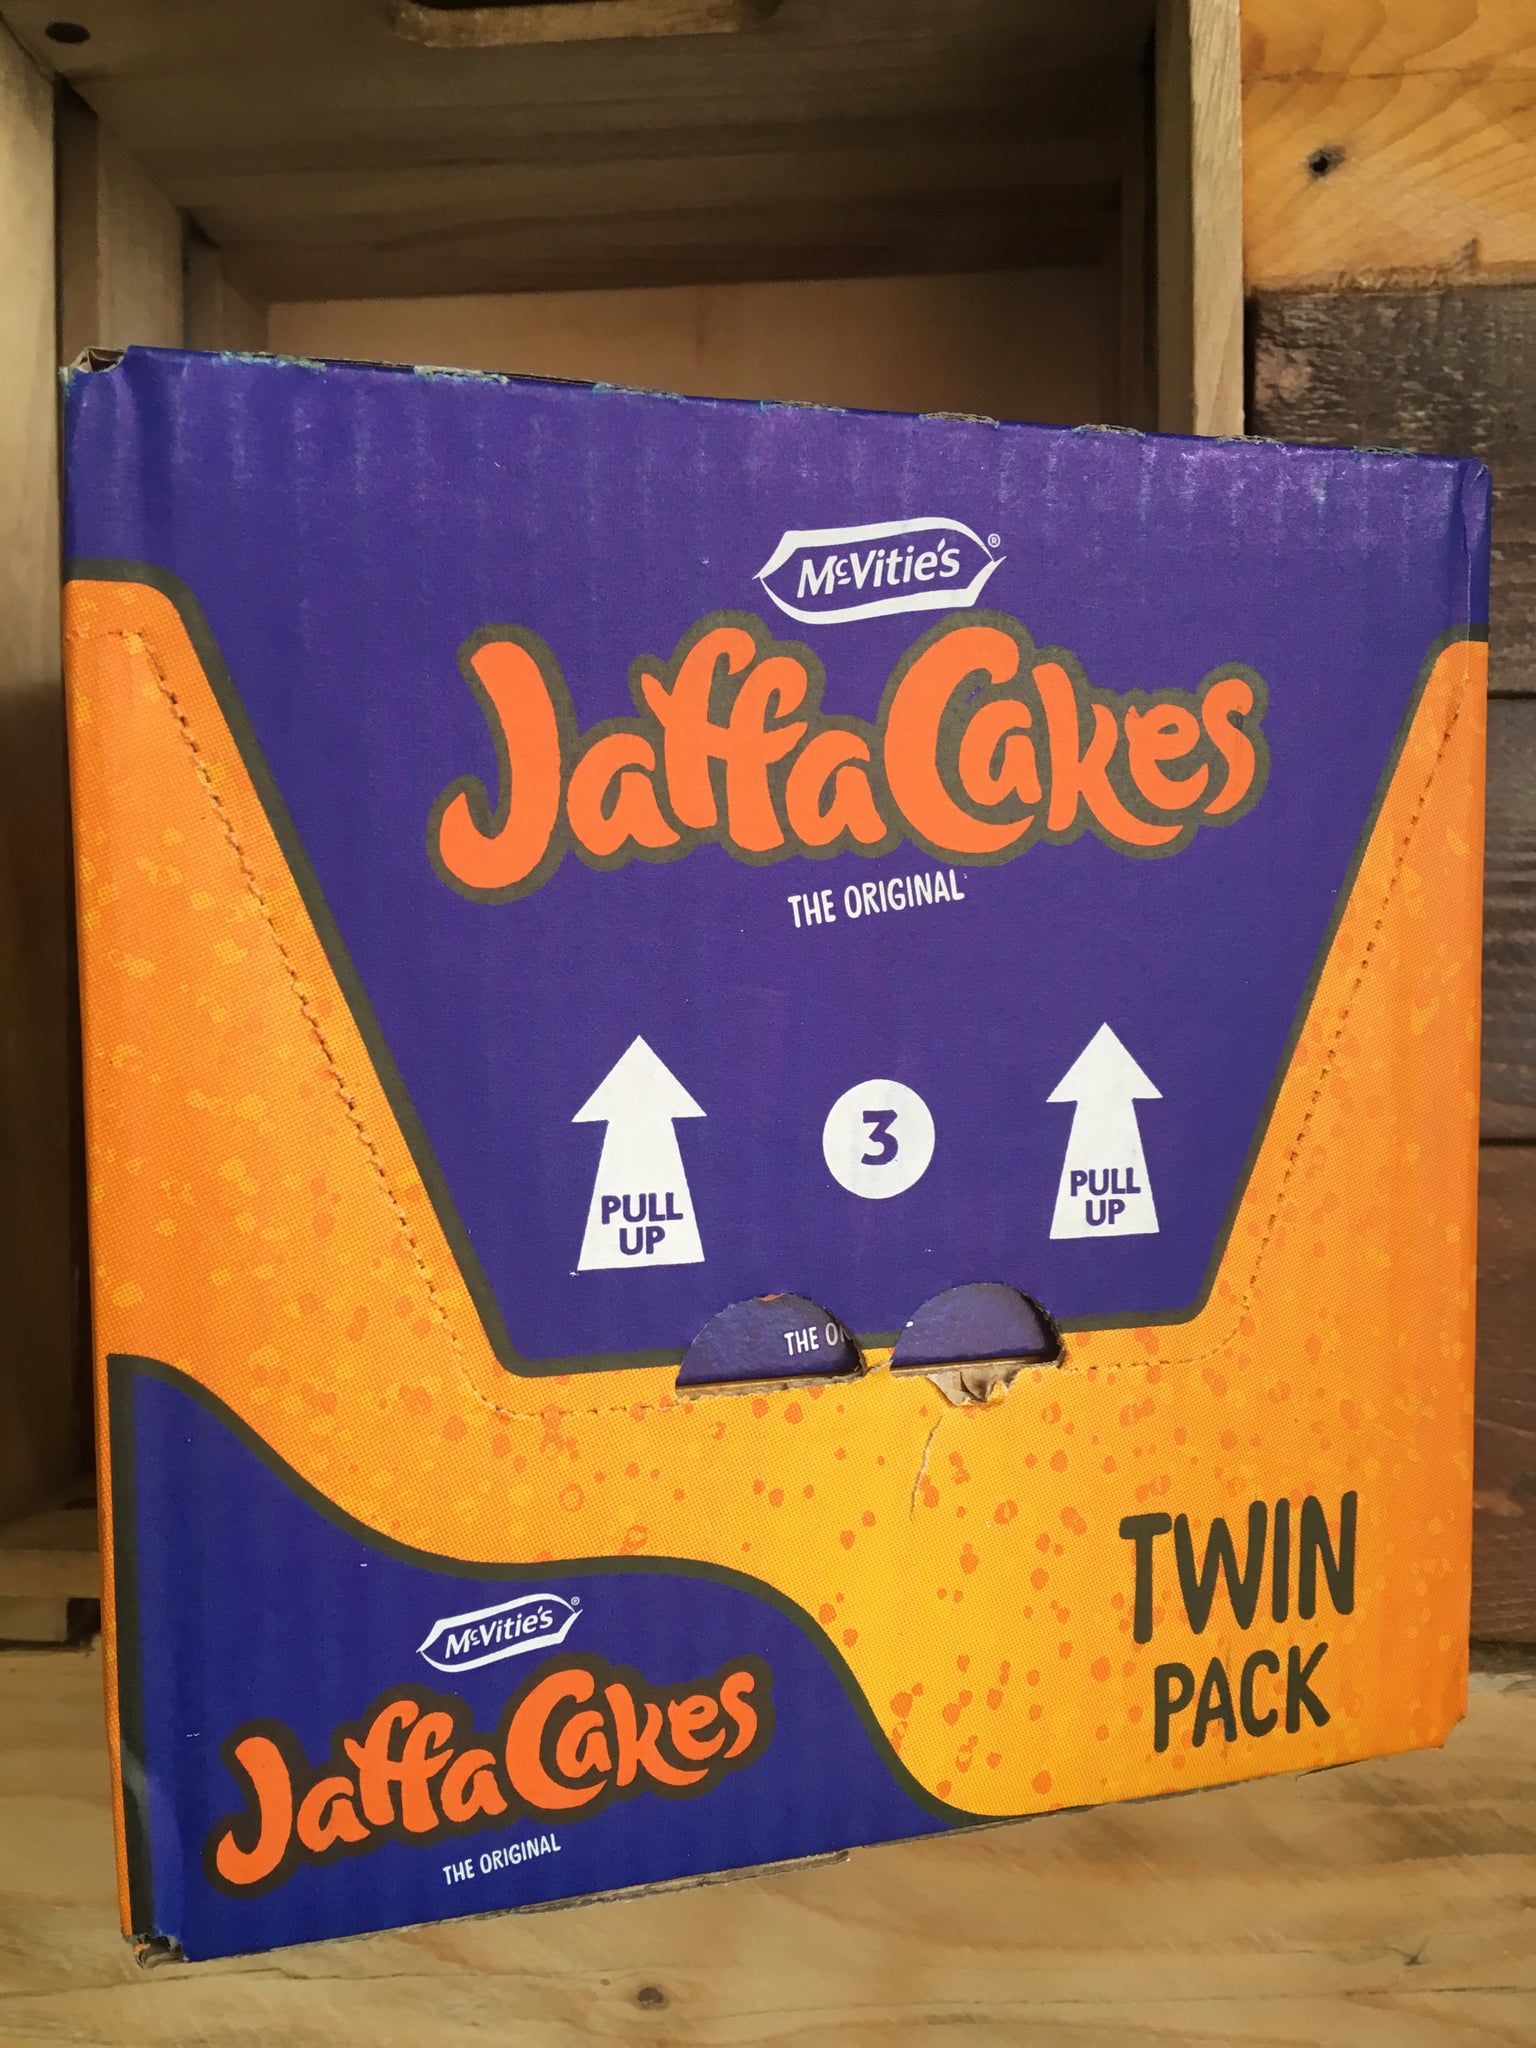 What Are Jaffa Cakes And What Do They Taste Like?